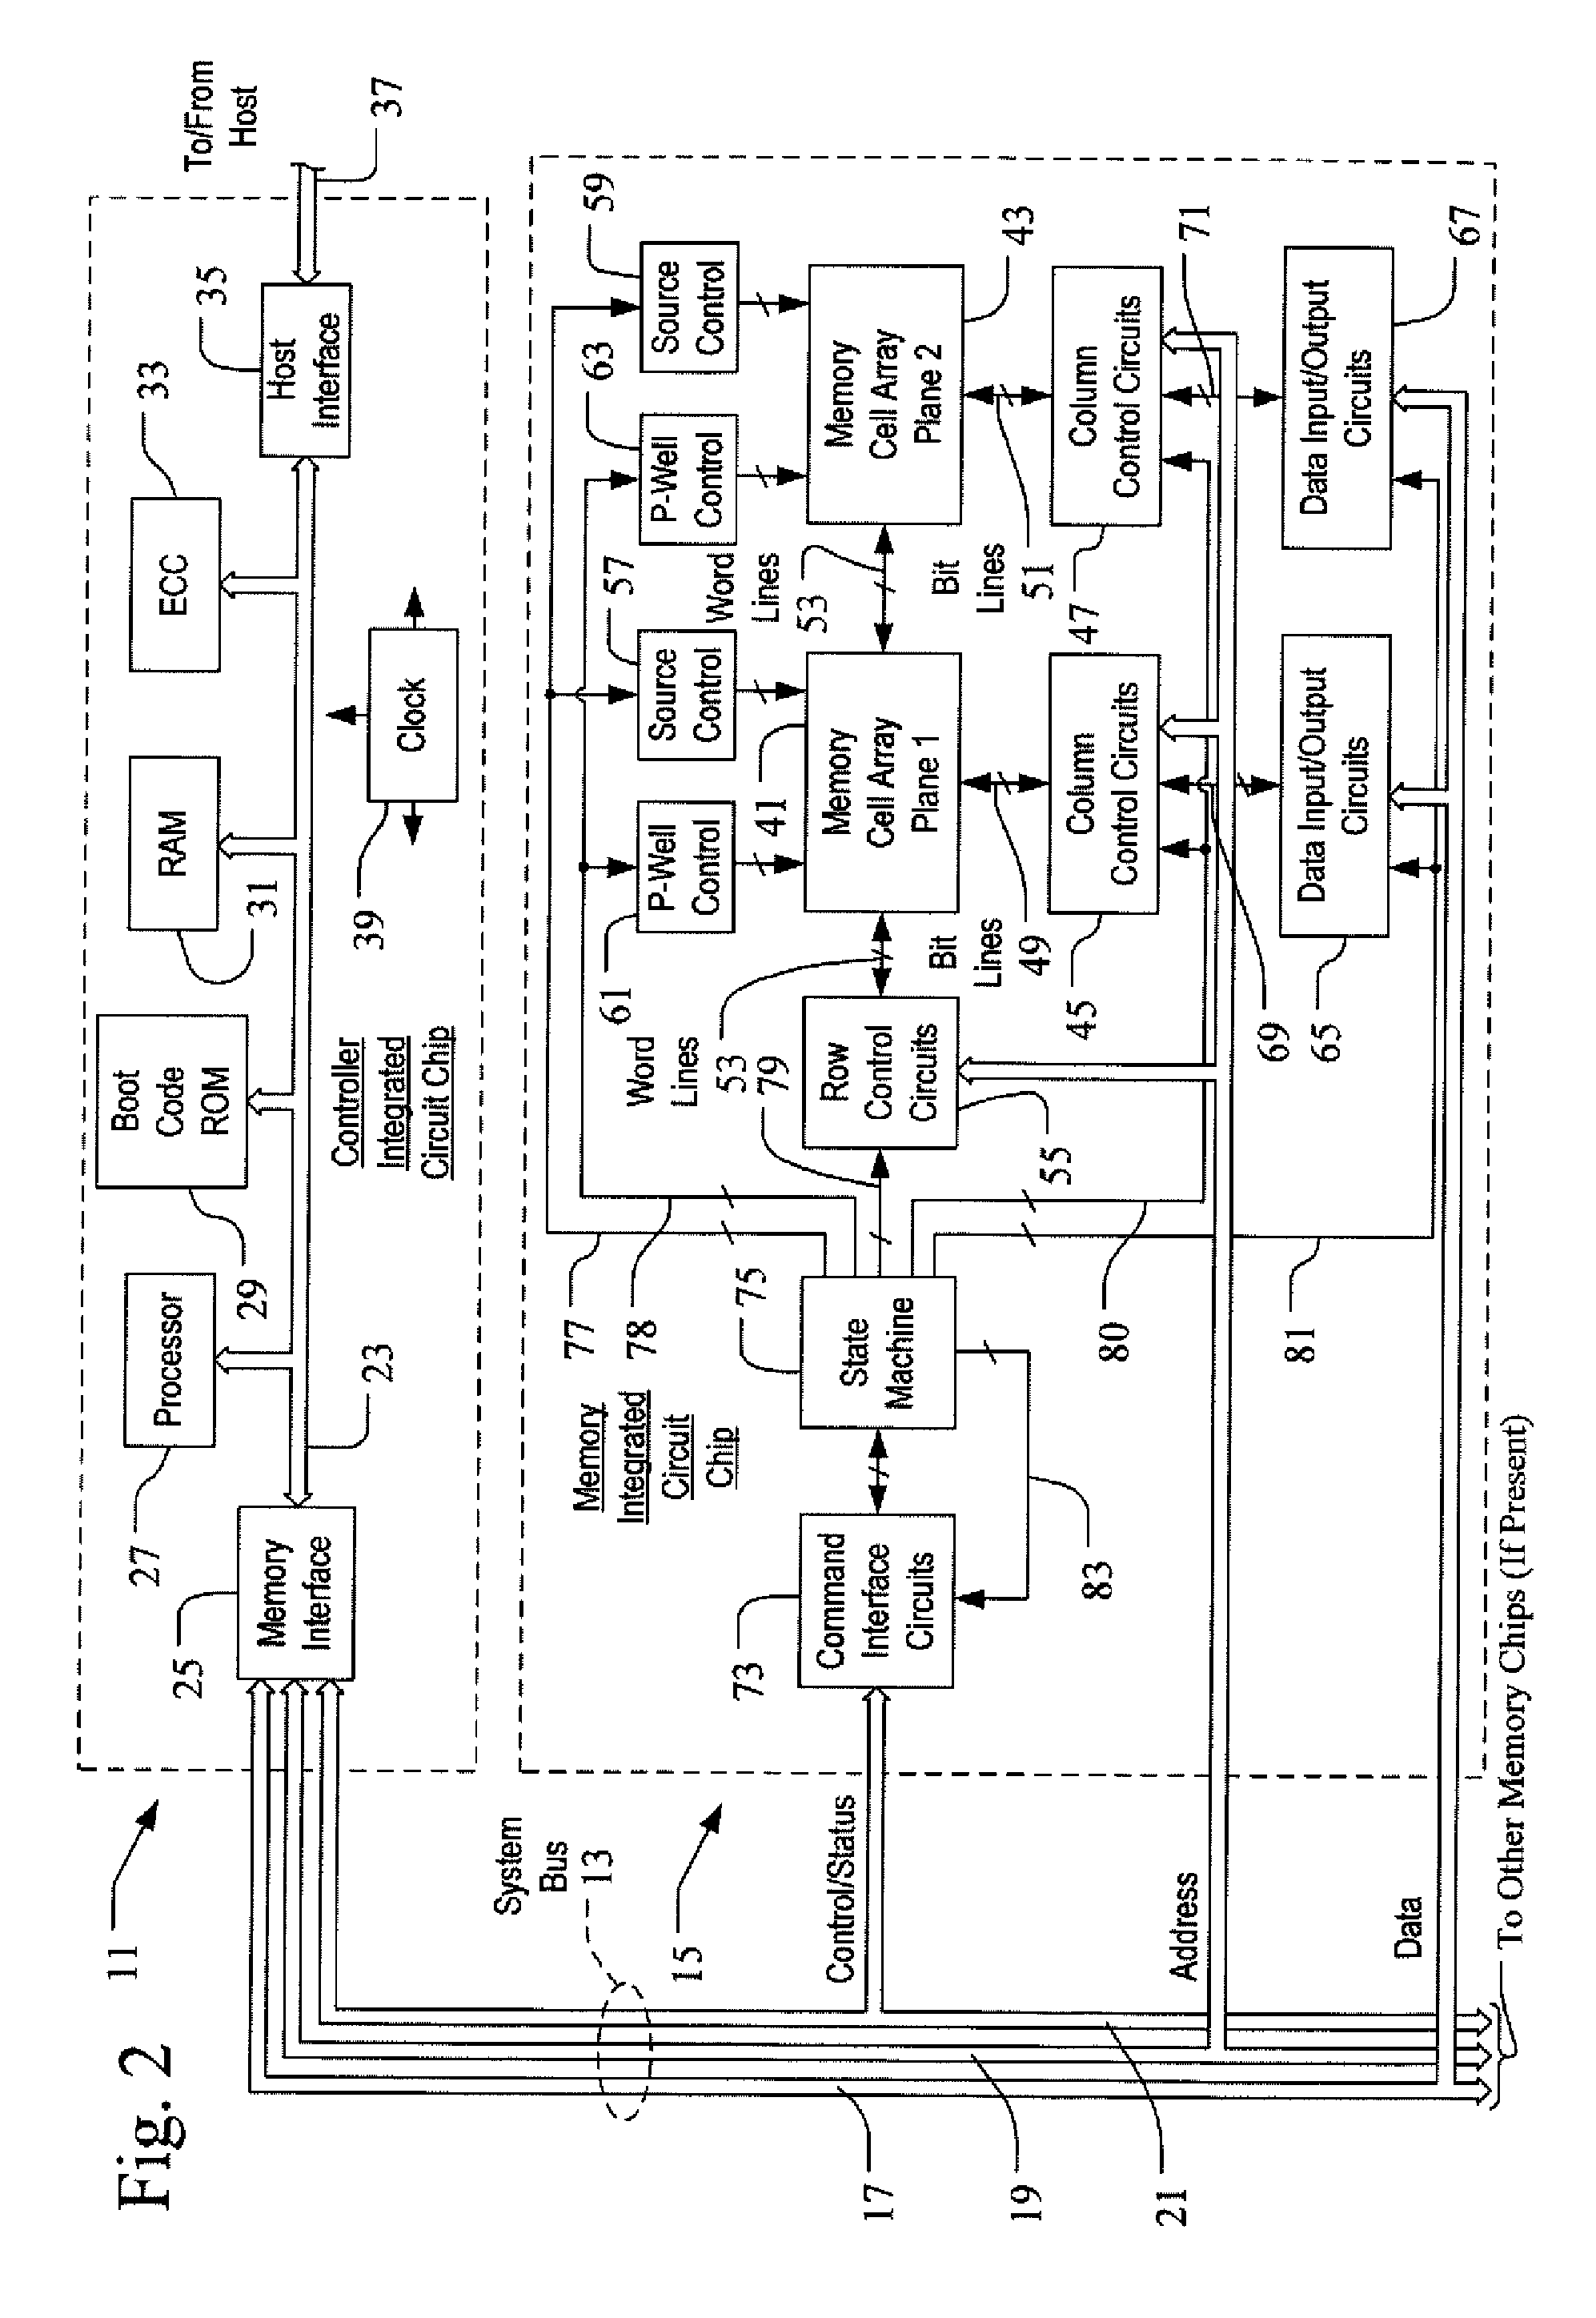 System and Method for Controlling an Amount of Unprogrammed Capacity in Memory Blocks of a Mass Storage System